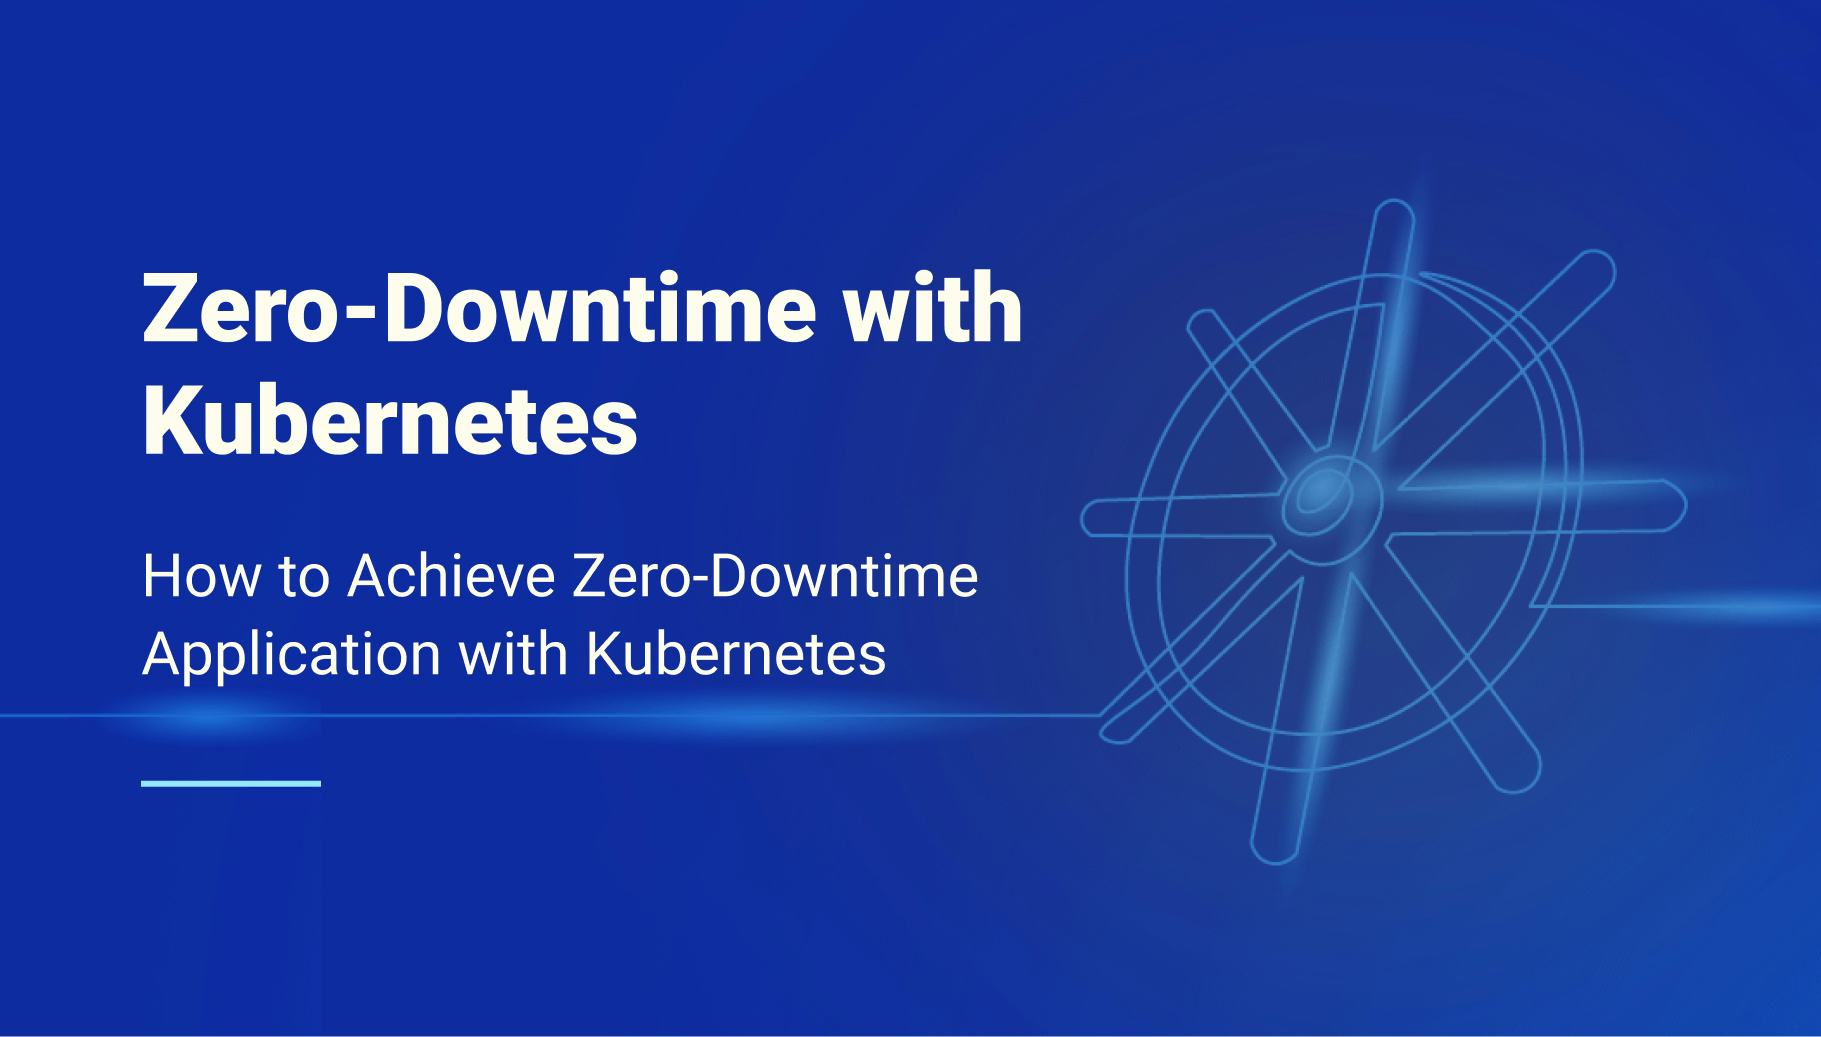 How to Achieve Zero-Downtime Application with Kubernetes